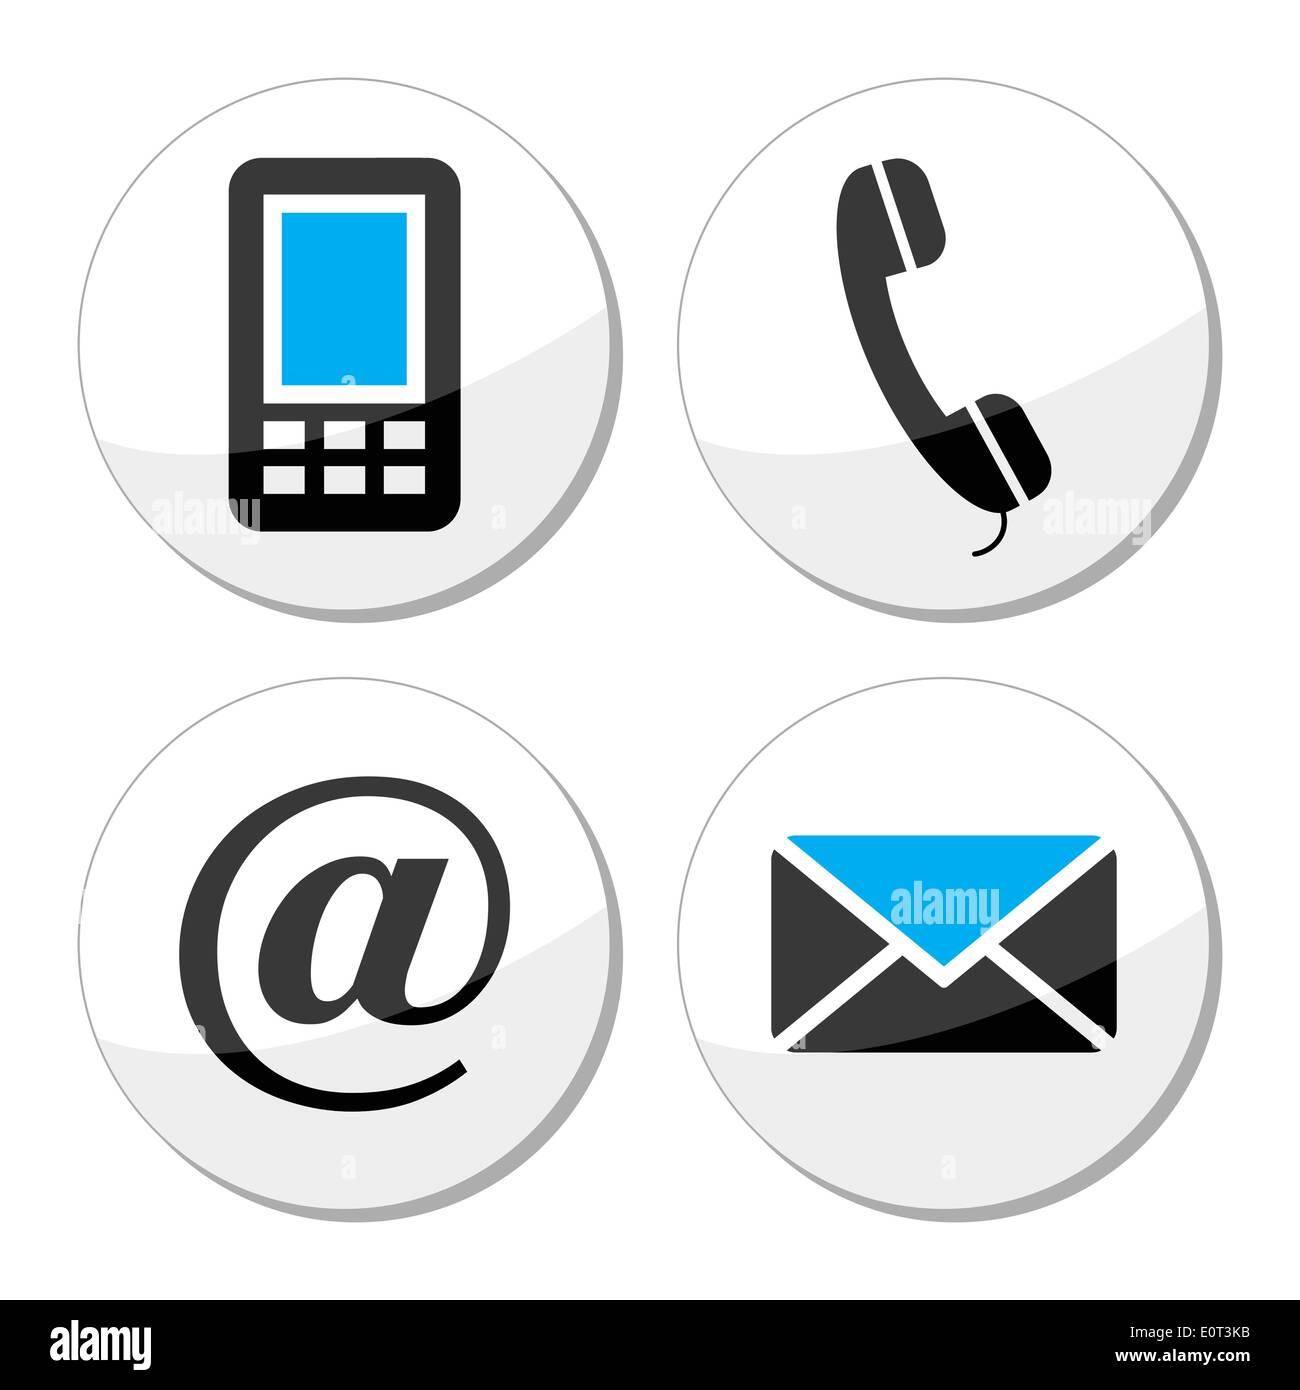 Contact web and internet vector icons set Stock Vector